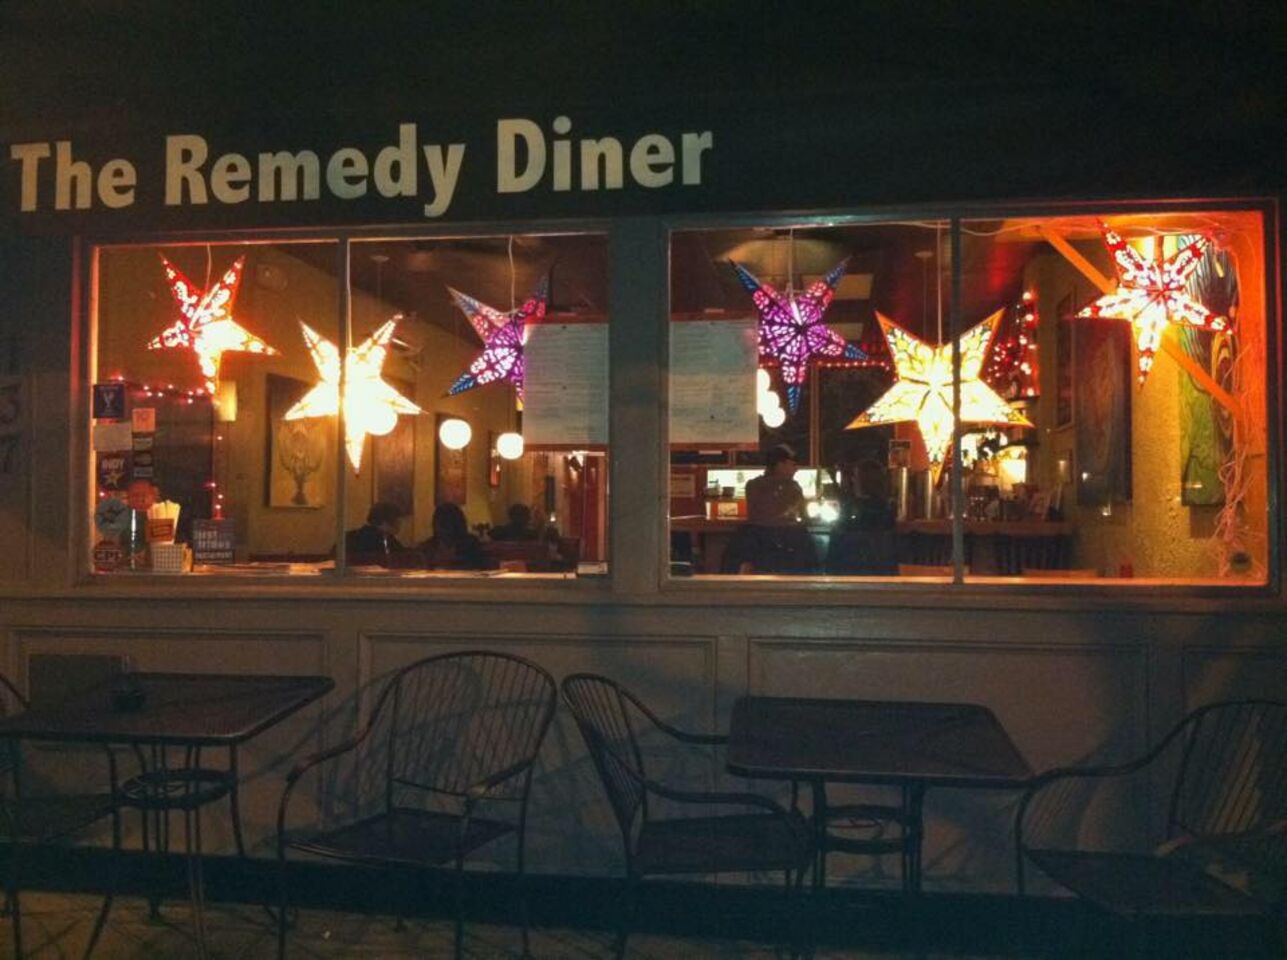 A photo of The Remedy Diner